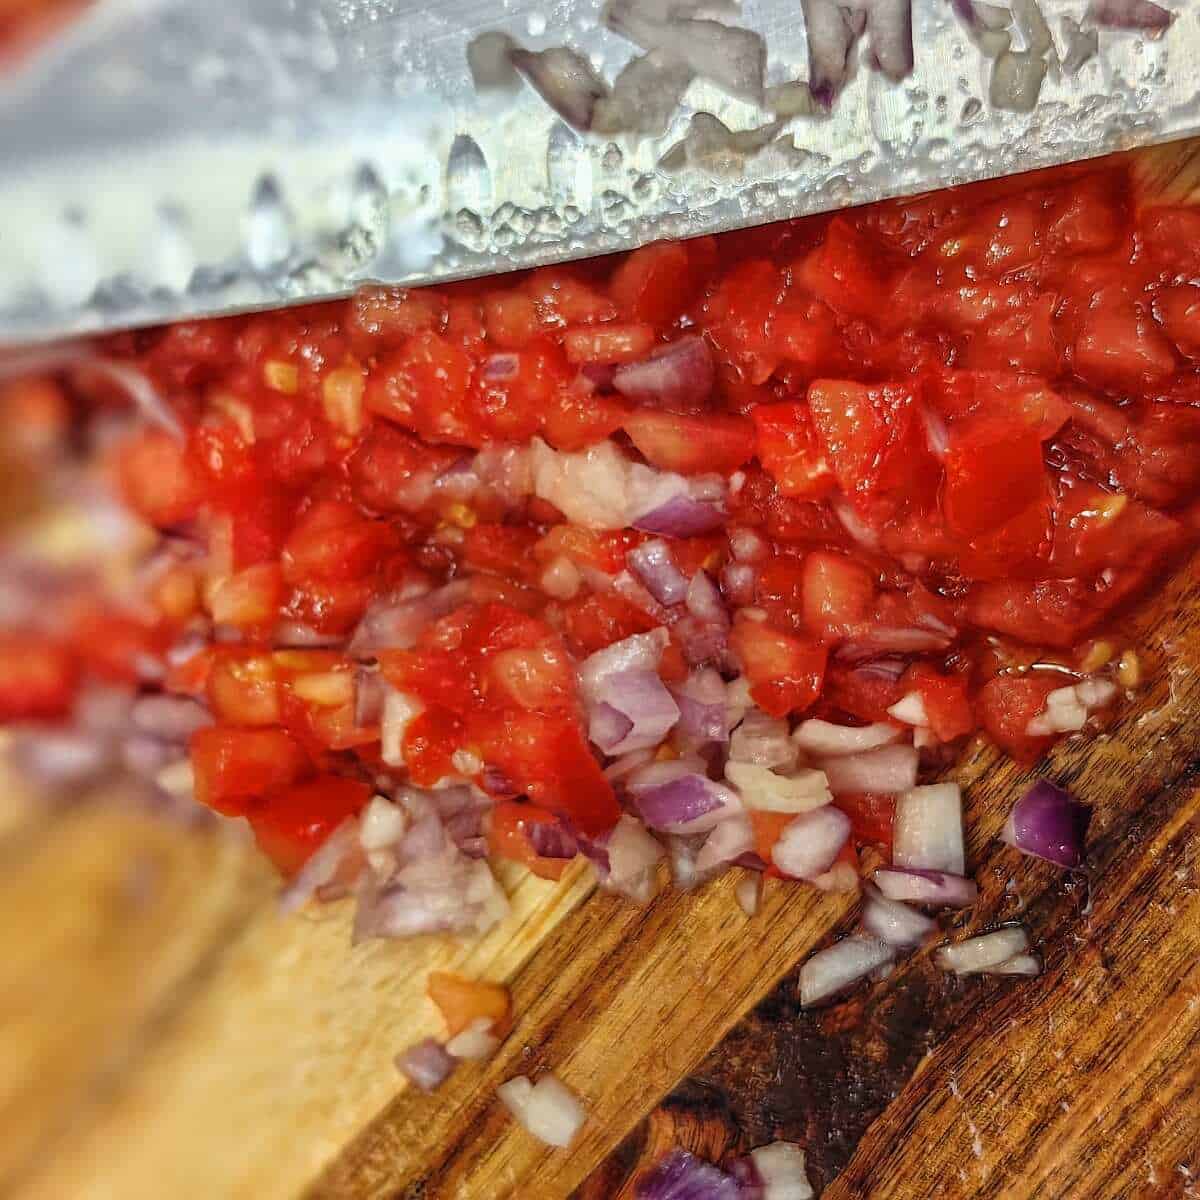 diced red onion and tomato with knife